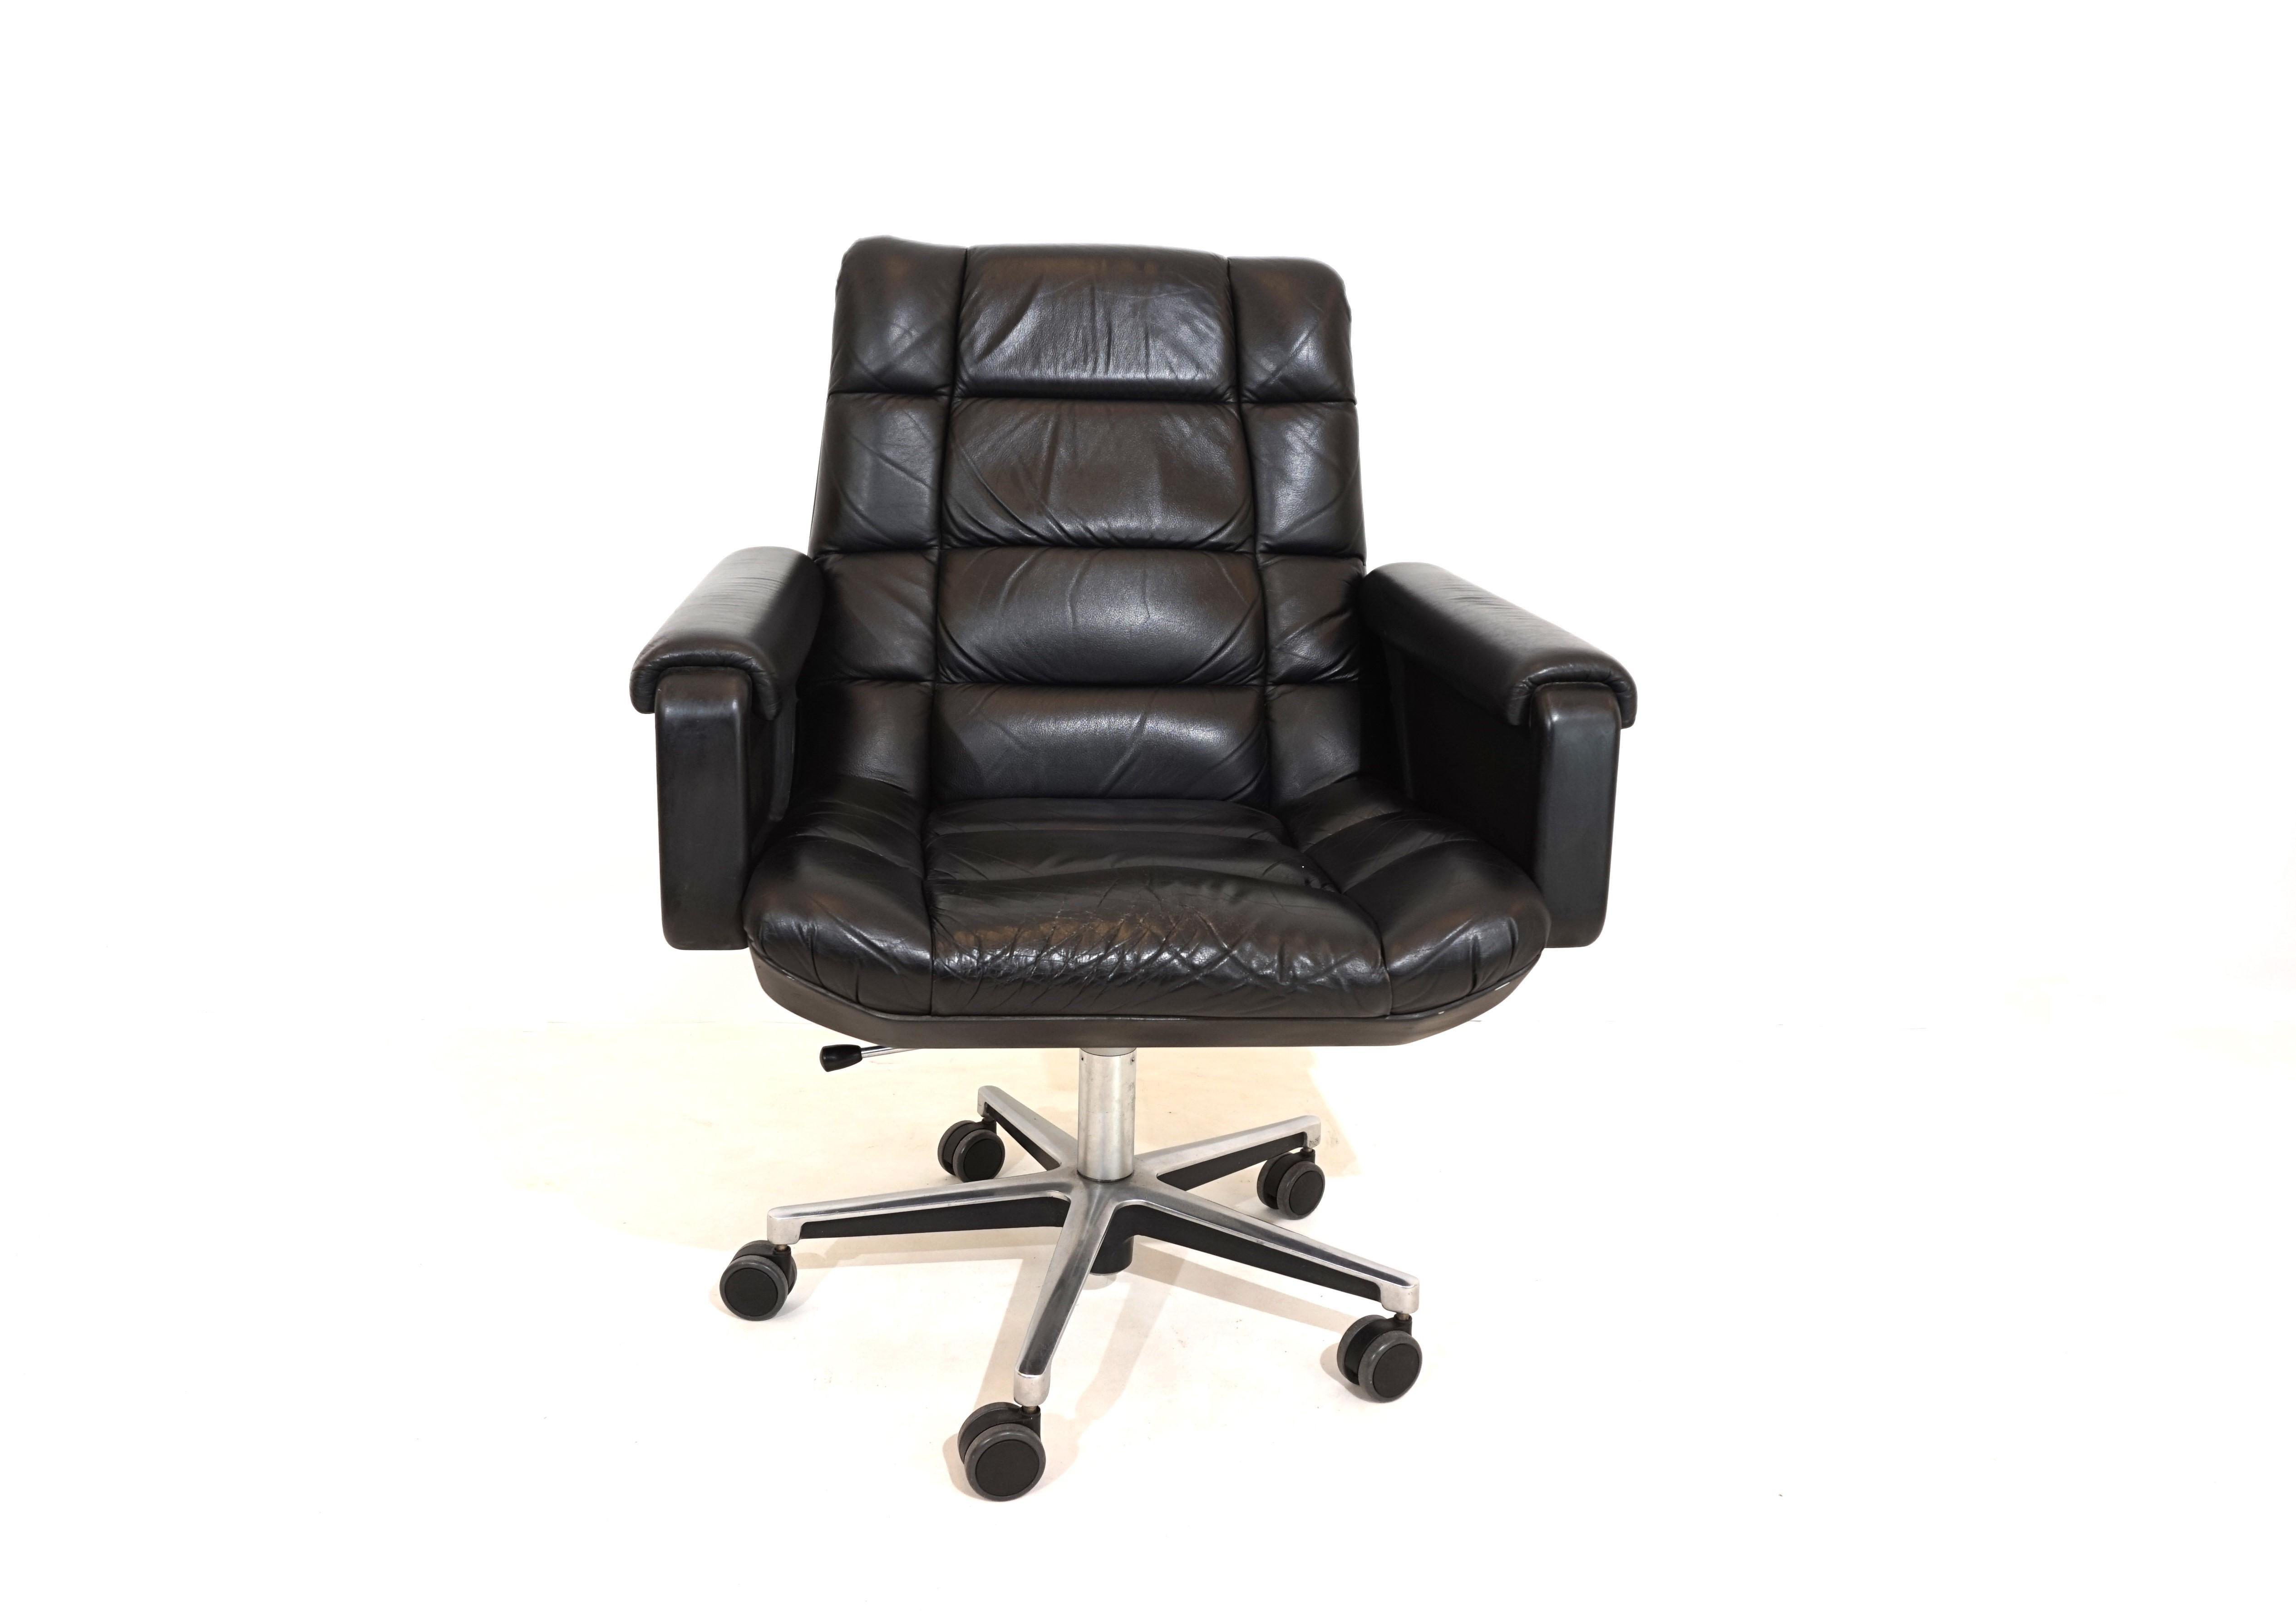 A Seat 150 office chair in a black/black color combination. The soft, black, quilted leather is in very good condition with a light patina. The black plastic shell of the backrest showed signs of wear, such as scratches. The plastic shells of the